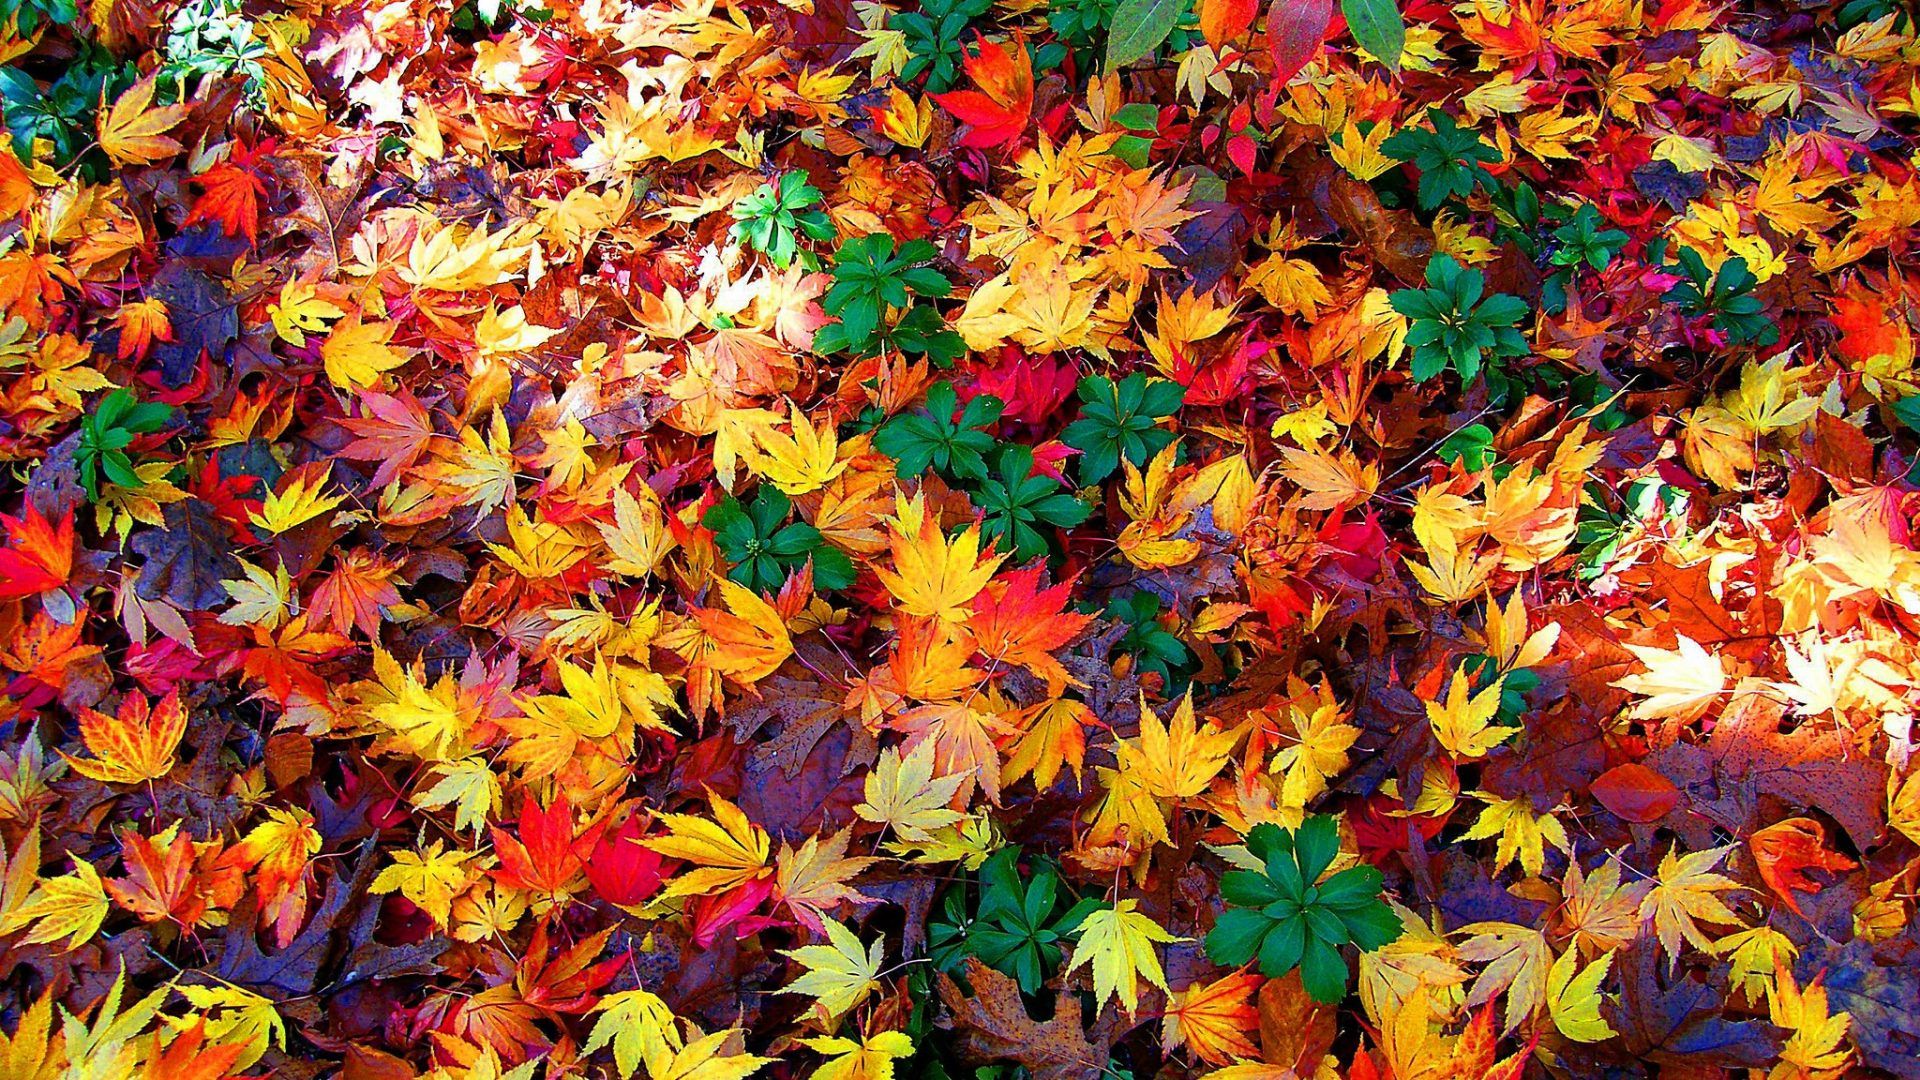 Misc Colorful Fall Leaves Autumn Wallpaper Gallery - Autumn Leaves Facebook  Cover - 1920x1080 Wallpaper 